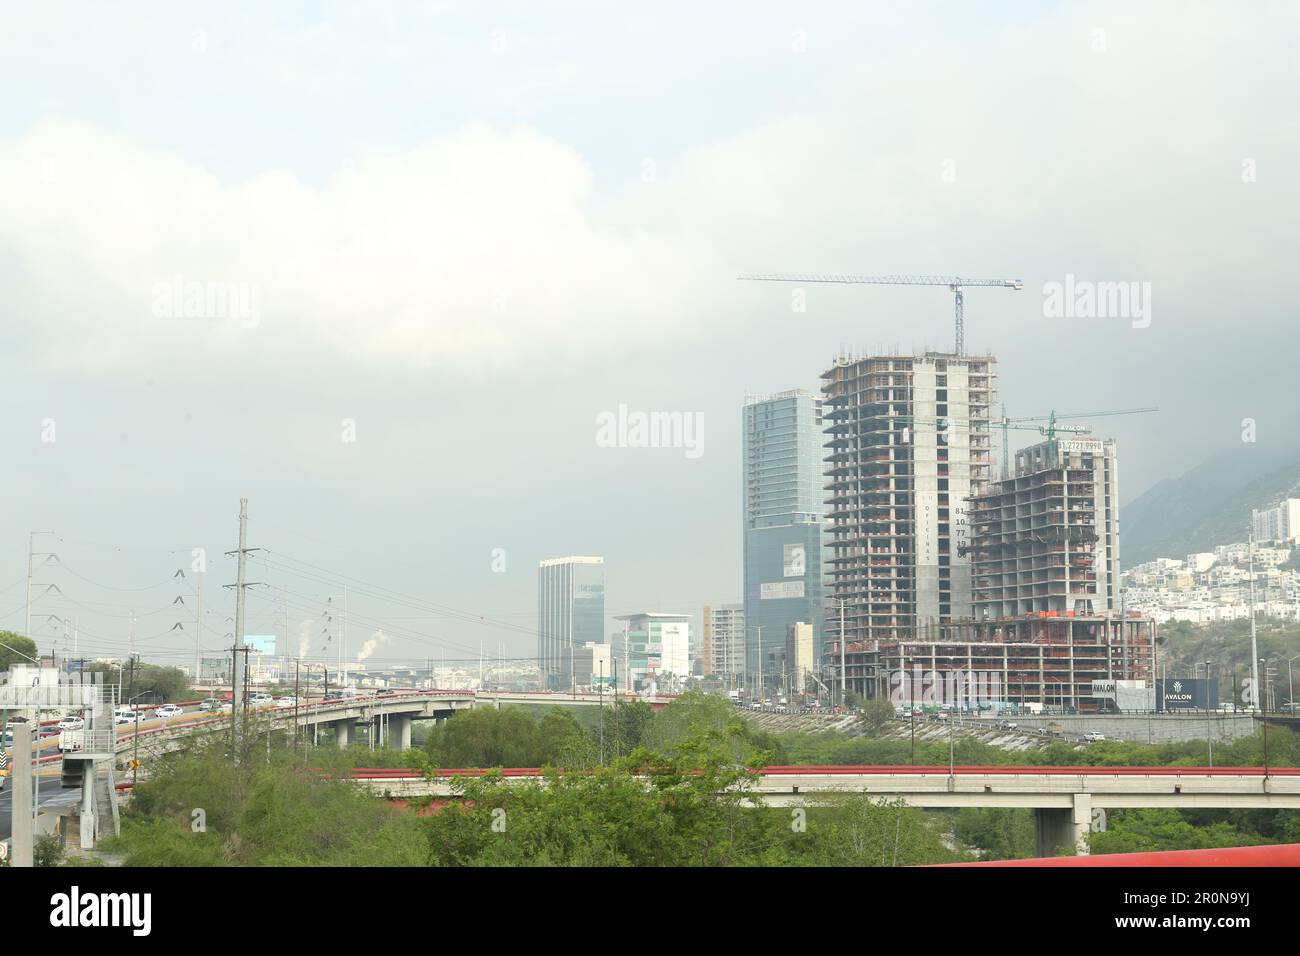 Beautiful view of unfinished buildings and road near mountains Stock Photo